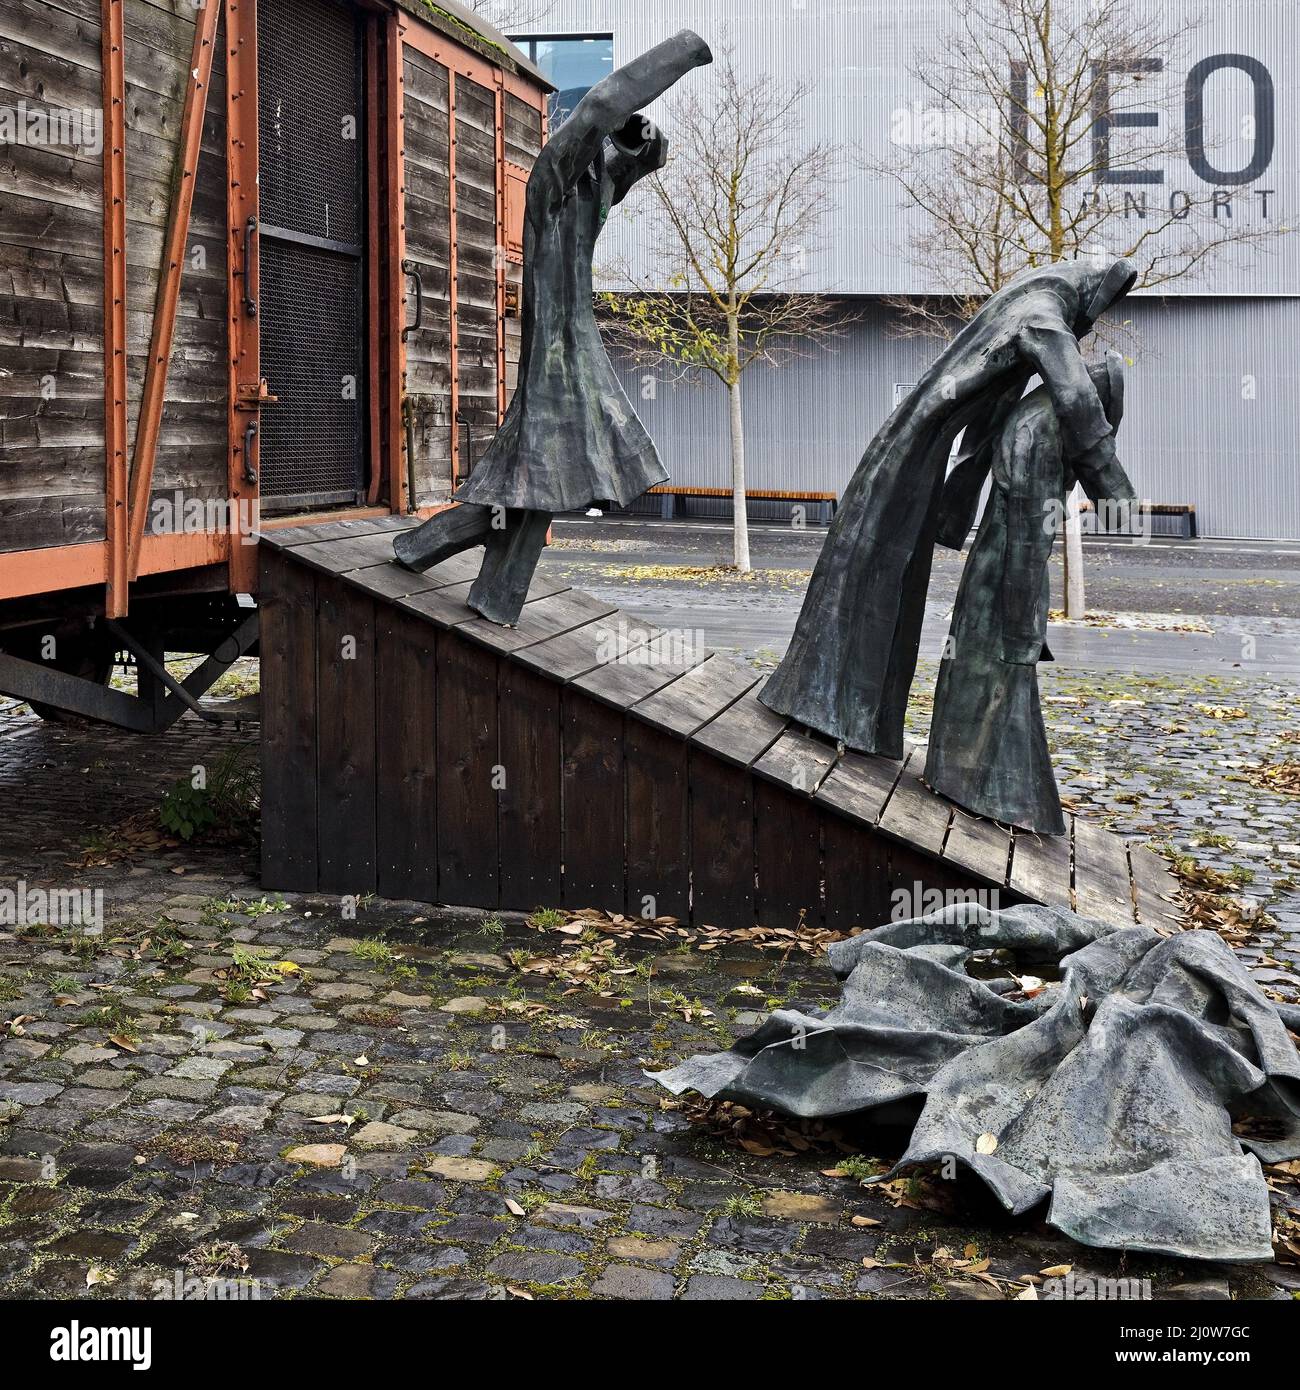 Memorial Die Rampe, artist E.R. Nele, memory of deportation and forced laborers, Kassel, Germany Stock Photo